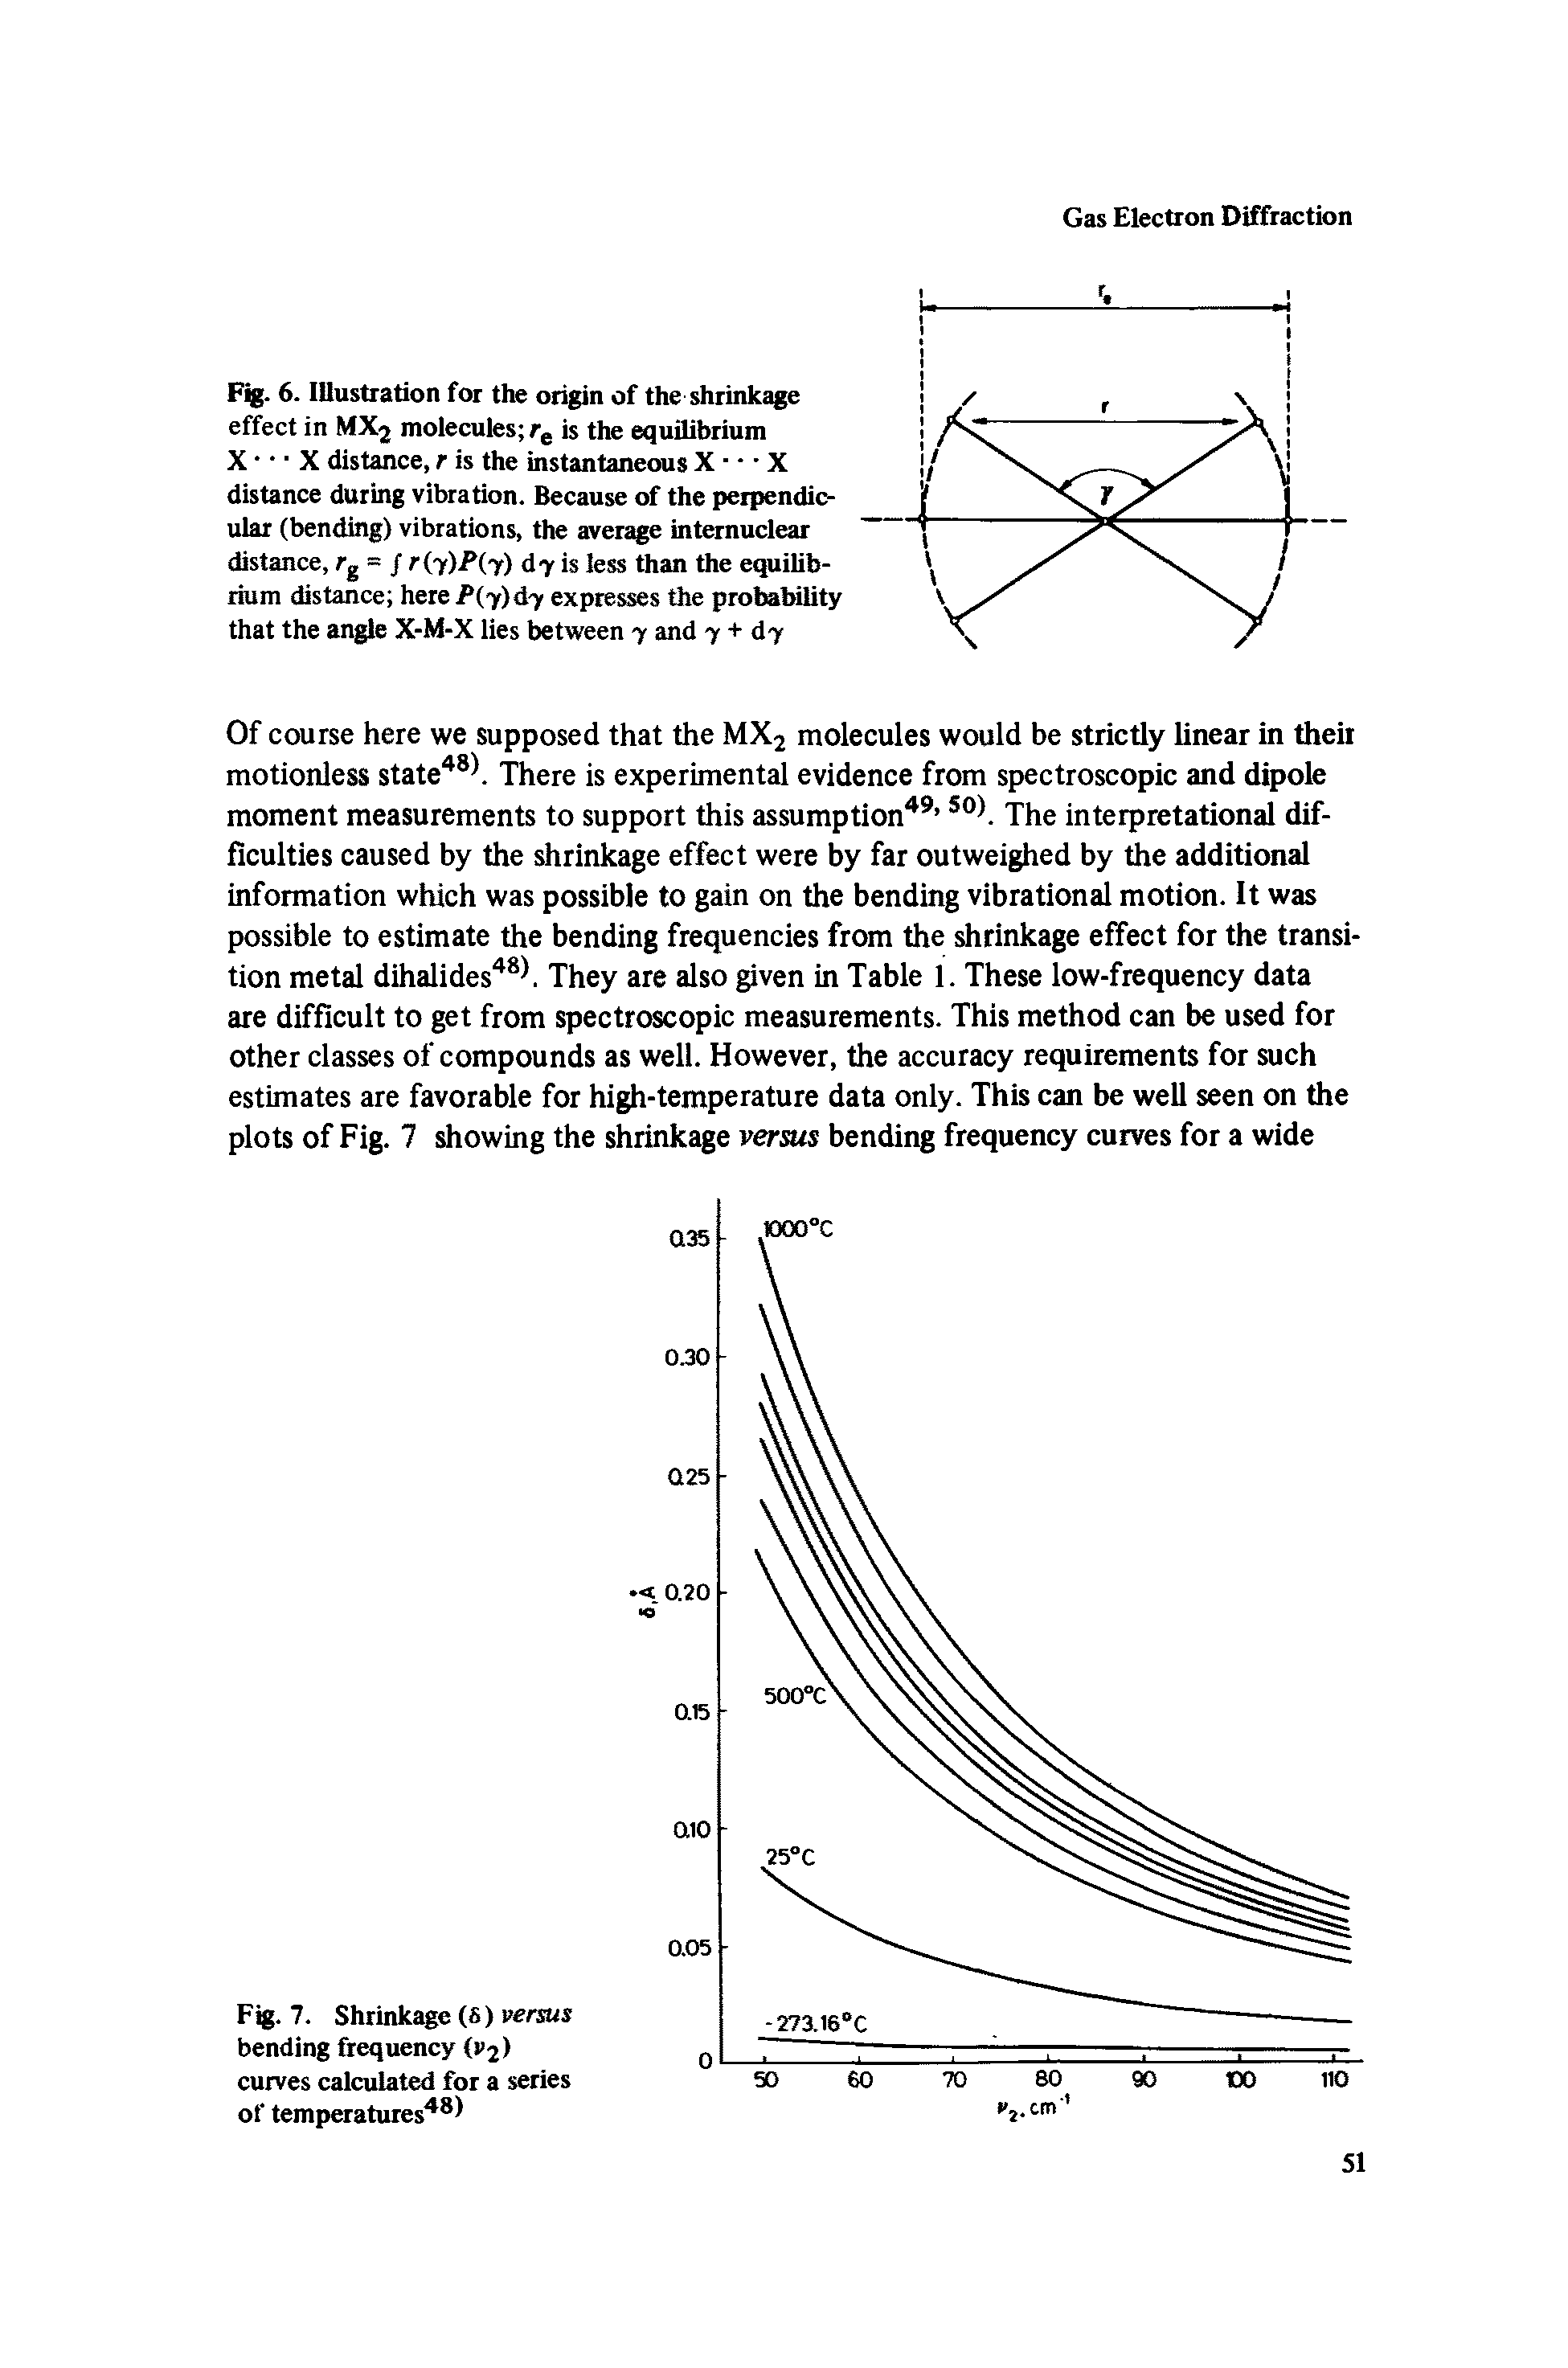 Fig. 6. Illustration for the origin of the shrinkage effect in MXj moiecuies is the equilibrium X X distance, r is the instantaneous X X distance during vibration. Because of the perpendic-uiar (bending) vibrations, the average internuciear distance, fg = / r i)P(y) d7 is less than the equilibrium distance here P(y)dy expresses the protebility that the angle X-M-X lies between y and y + dy...